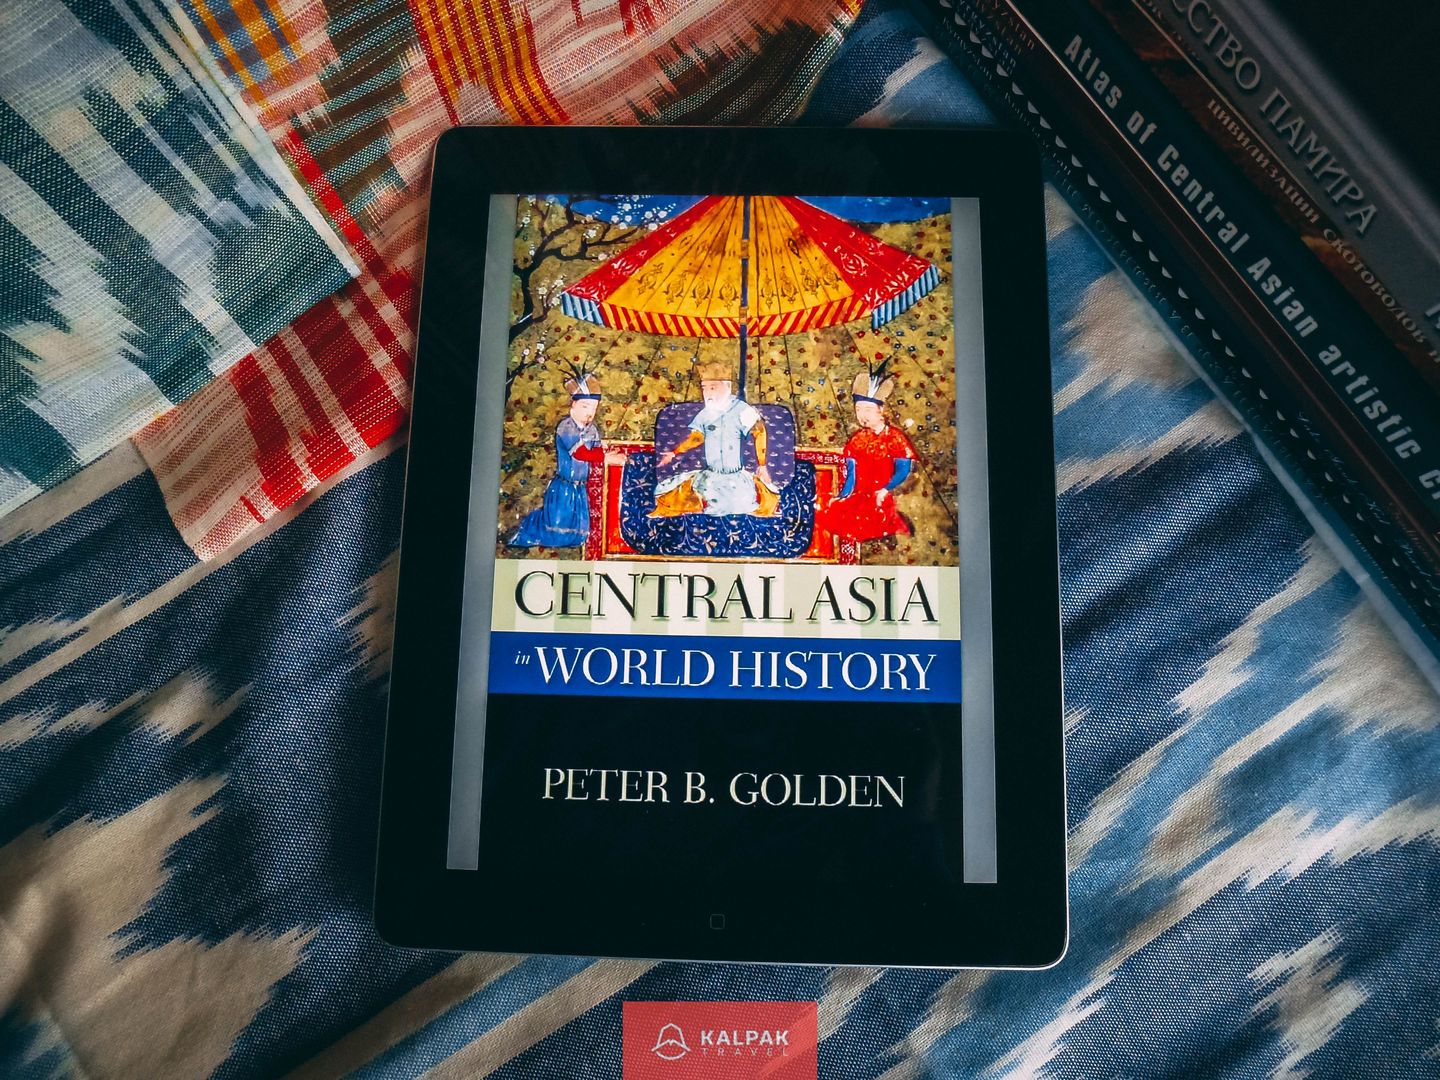 Central Asia history books